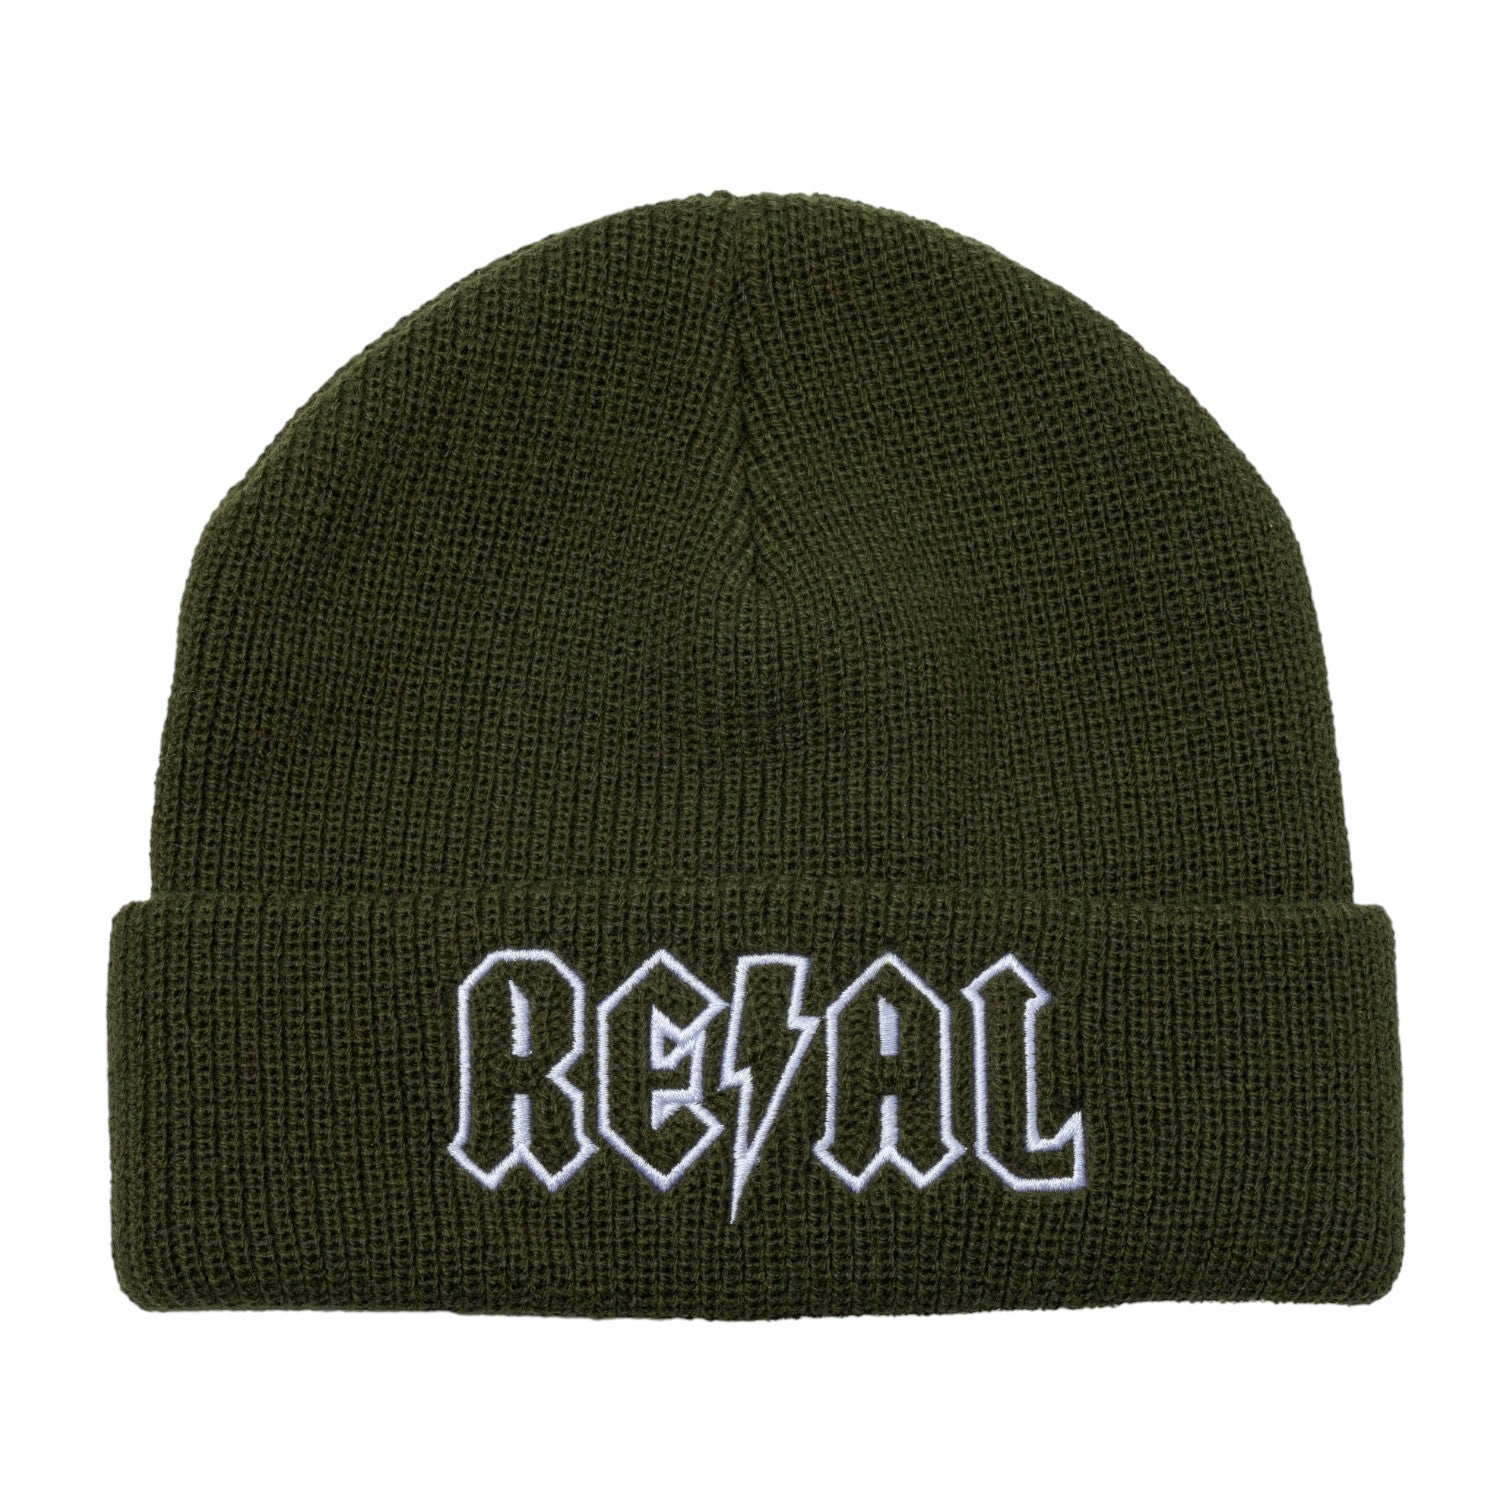 Real Deeds Embroidered Cuff Beanie - Olive